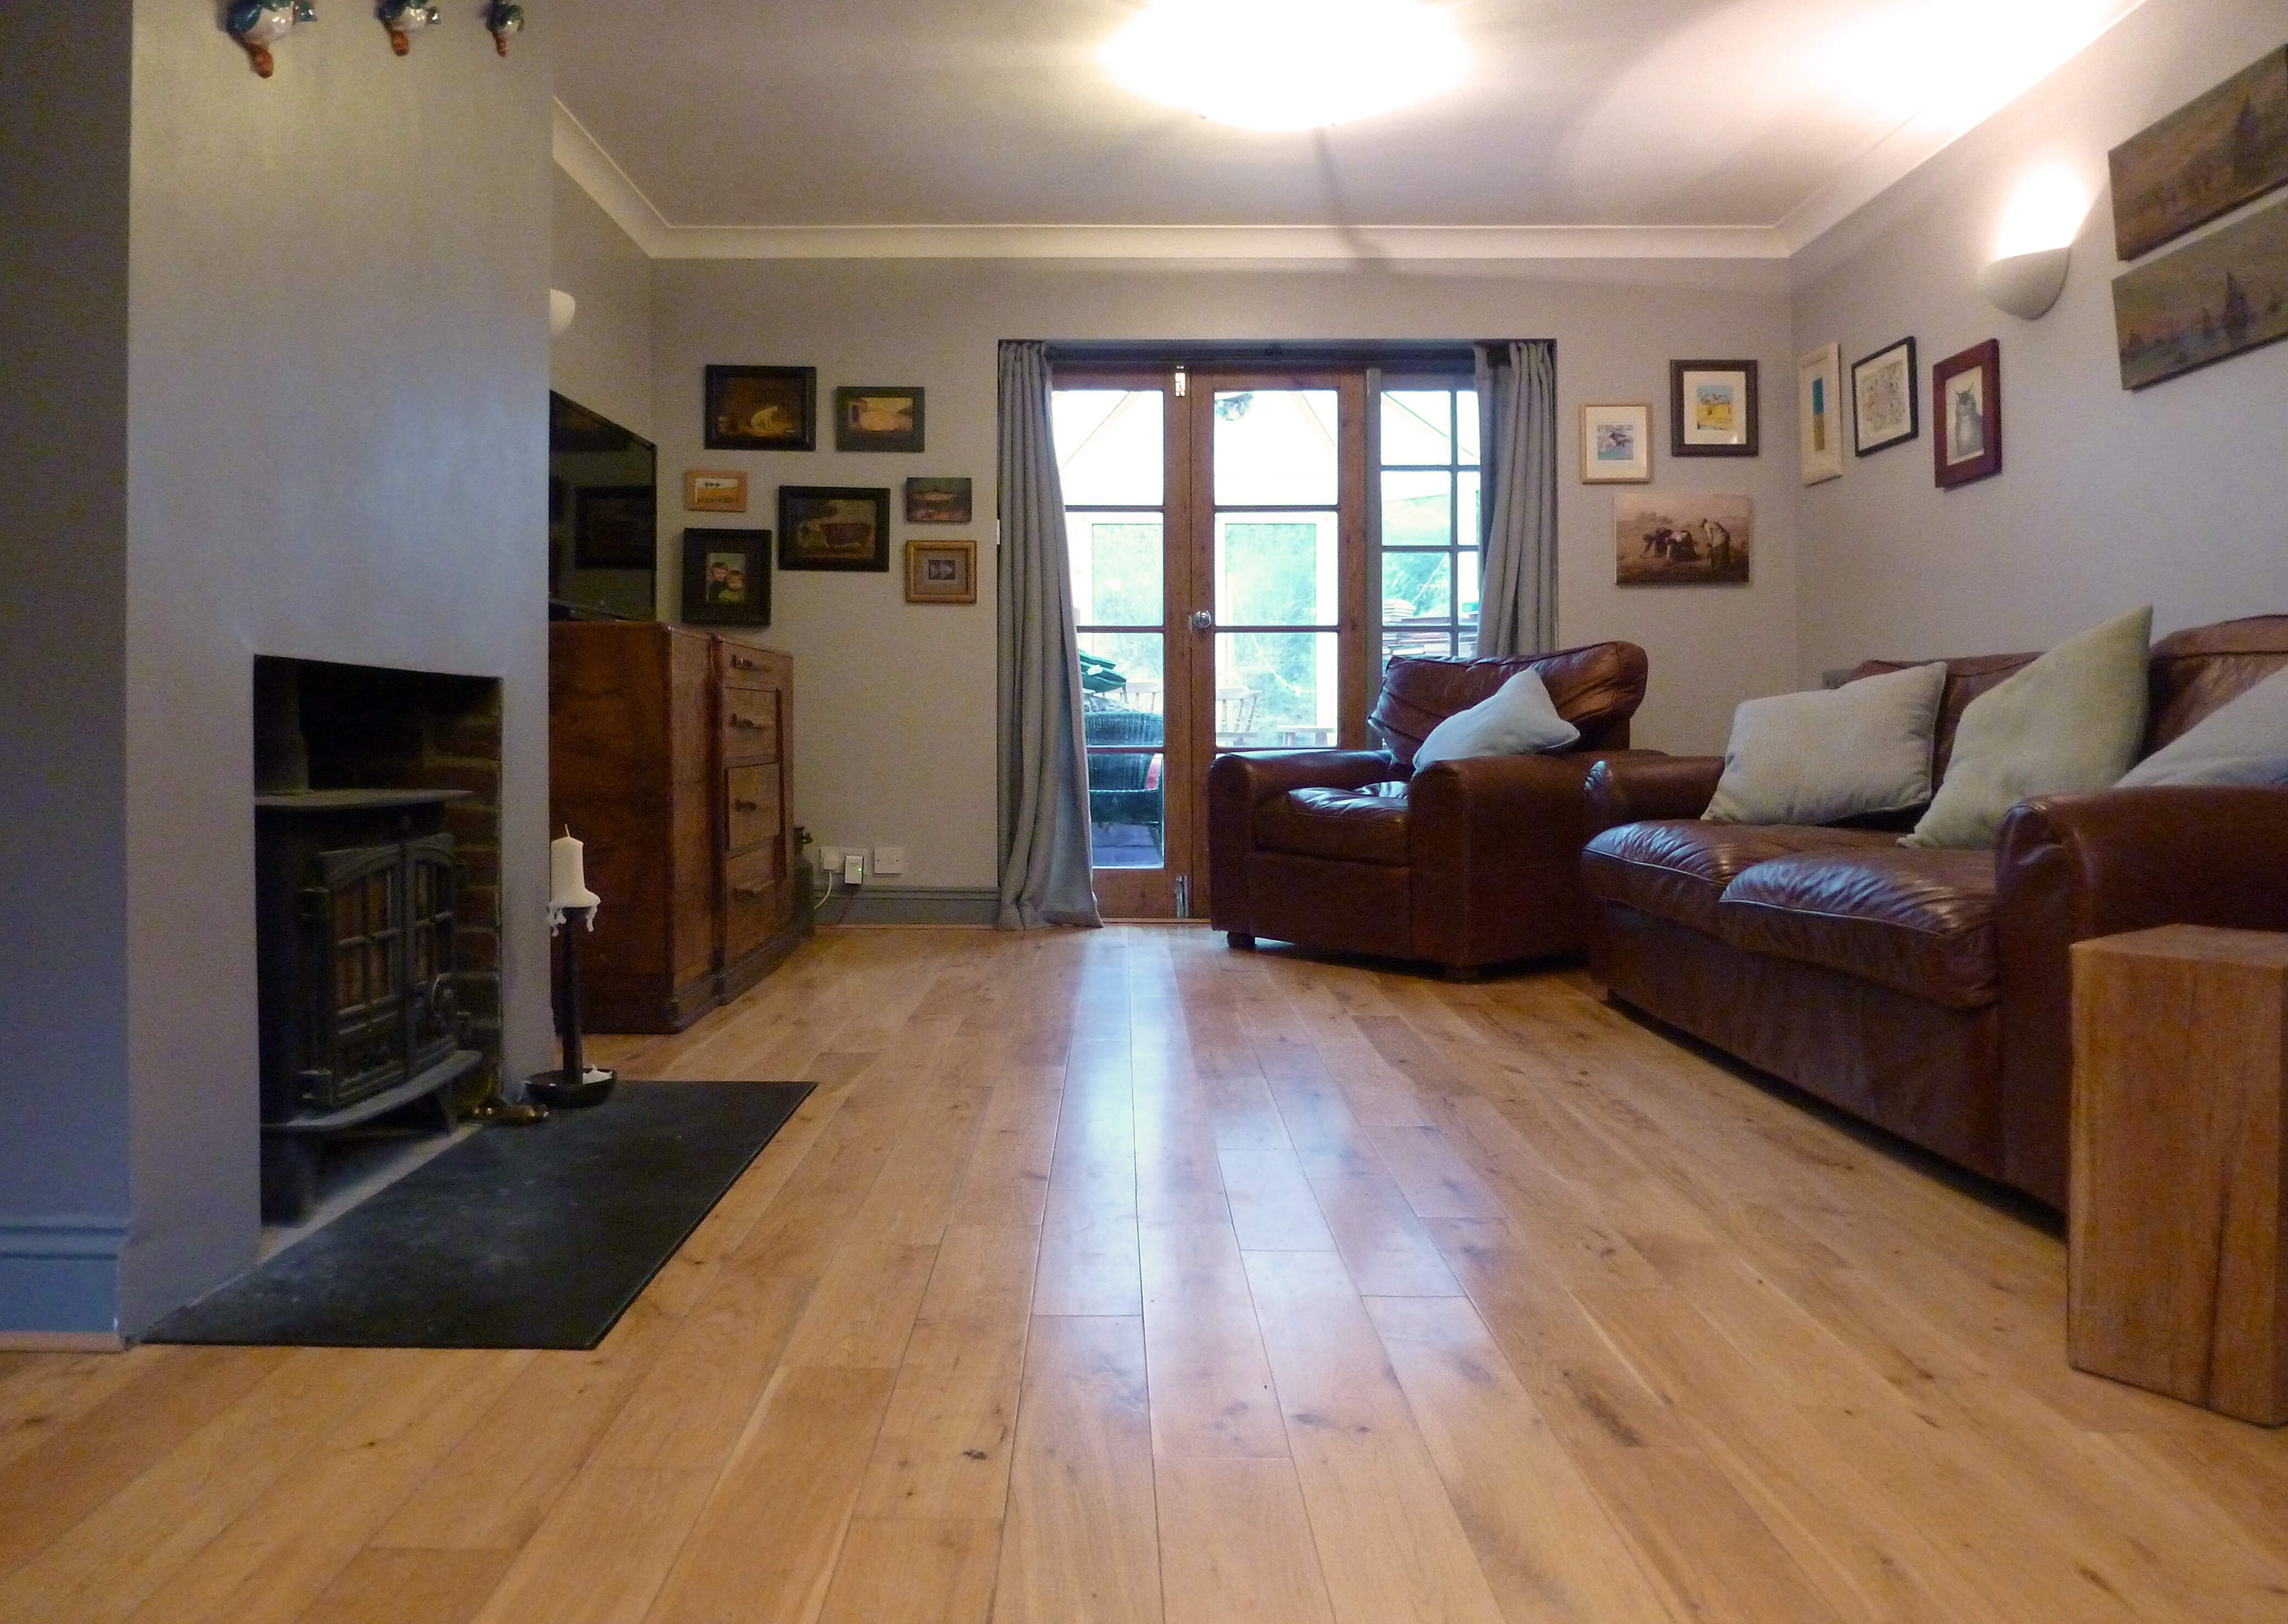 Preparation and installation of a solid oak floor on a concrete sub floor